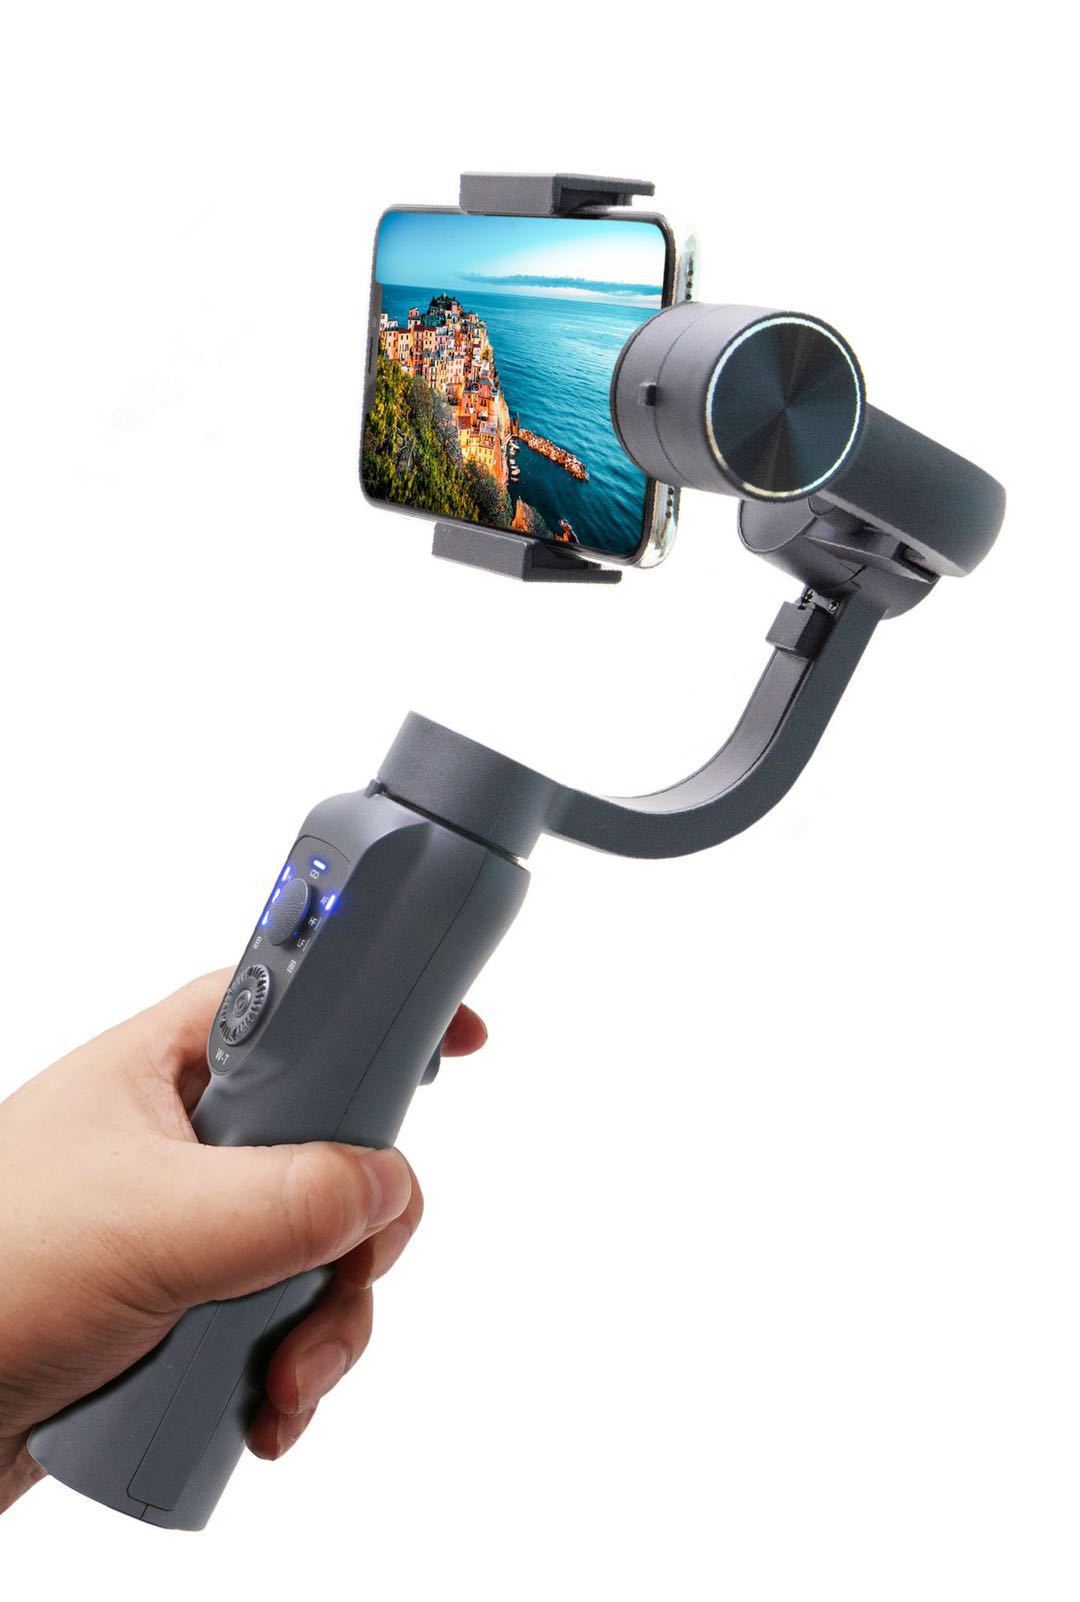 Holding stabilizer and handheld gimbal